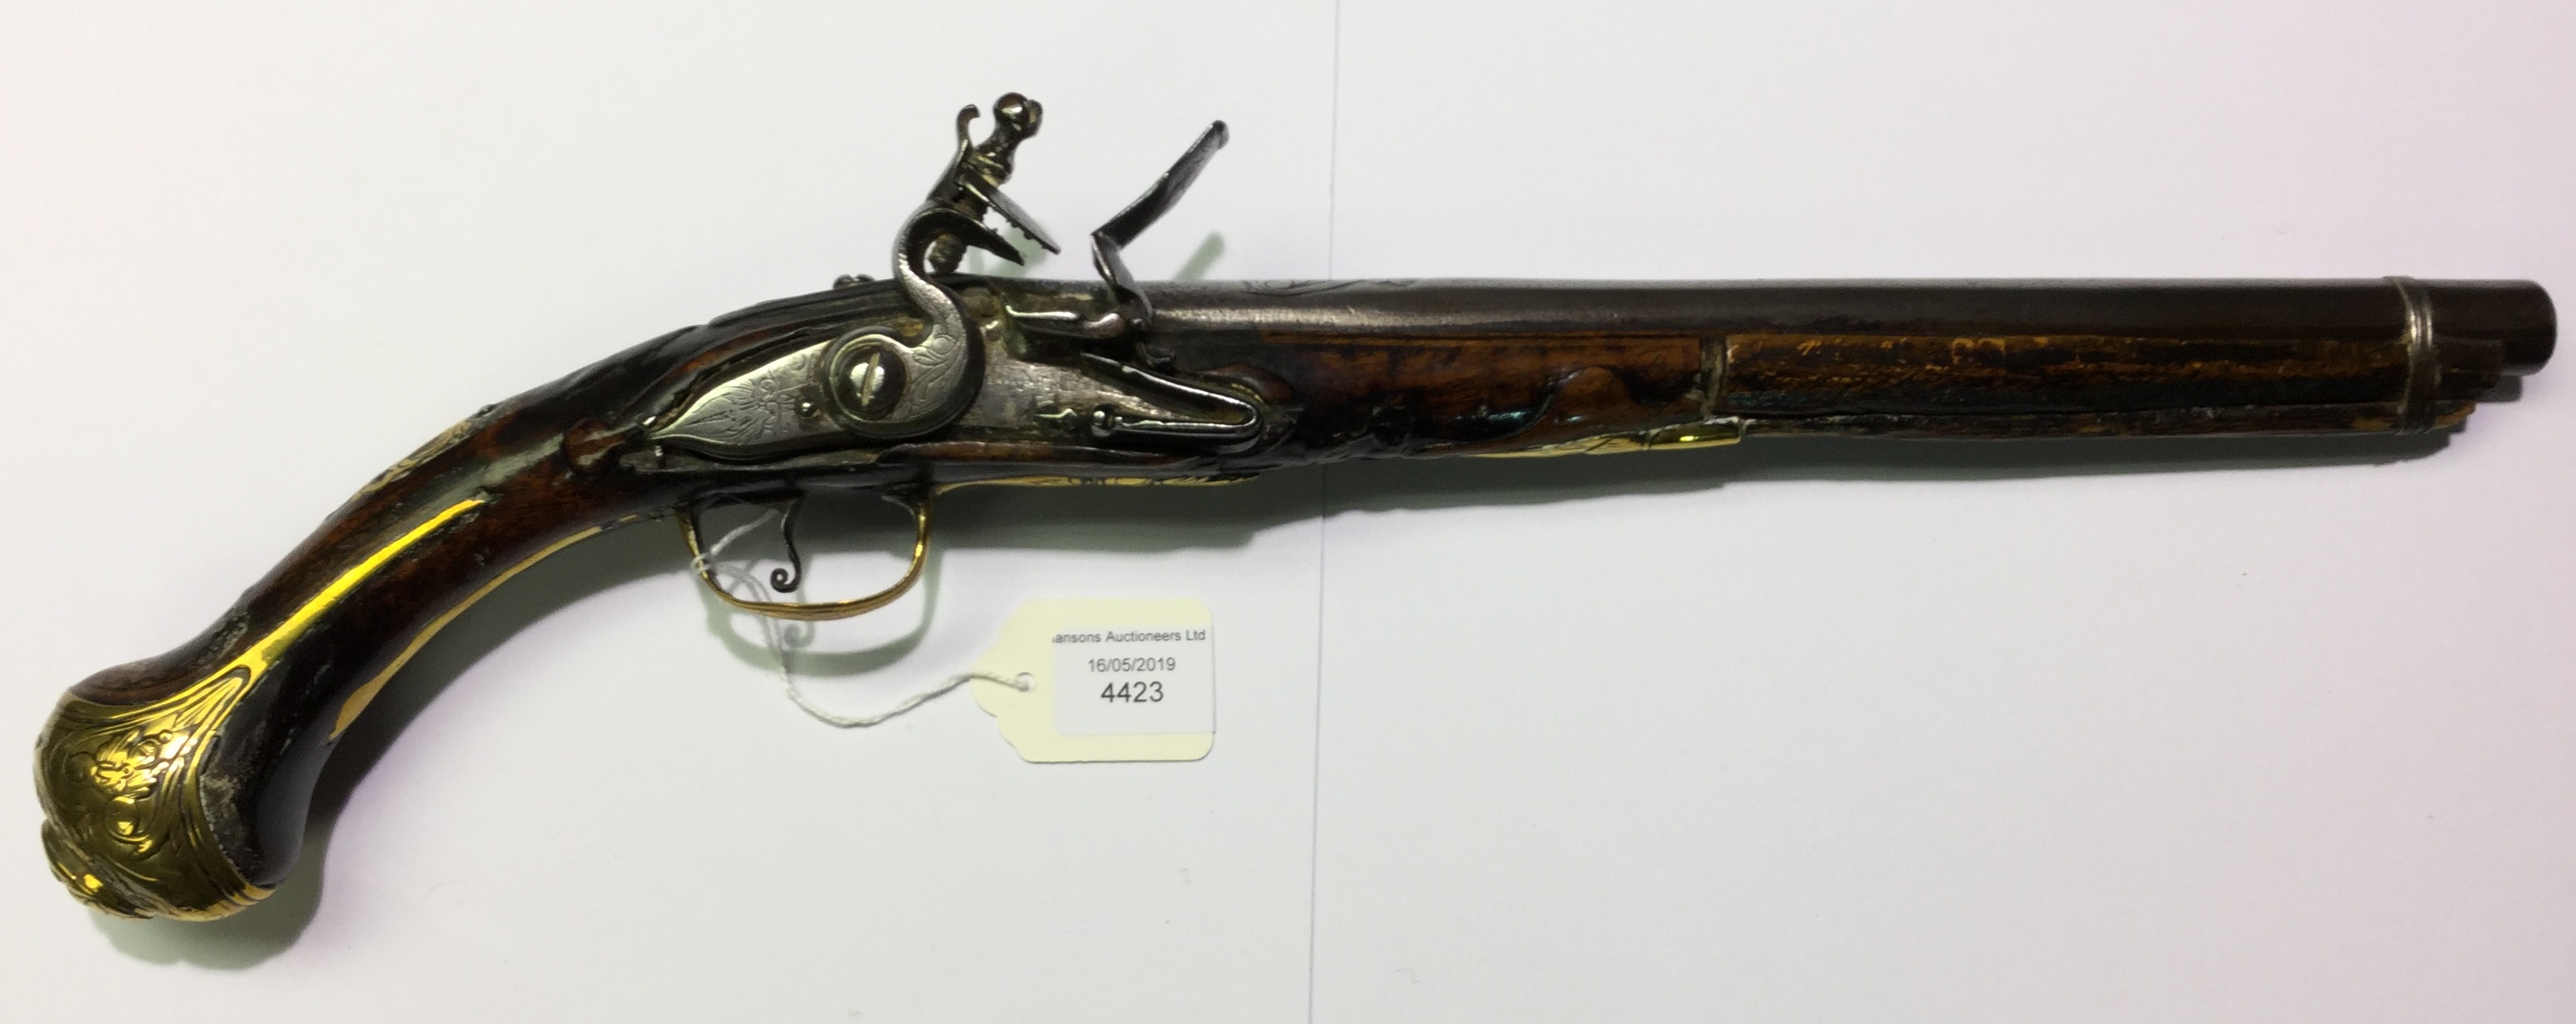 Flintlock pistol with 300mm long barrel. Engraved barrel with grotesque mask.